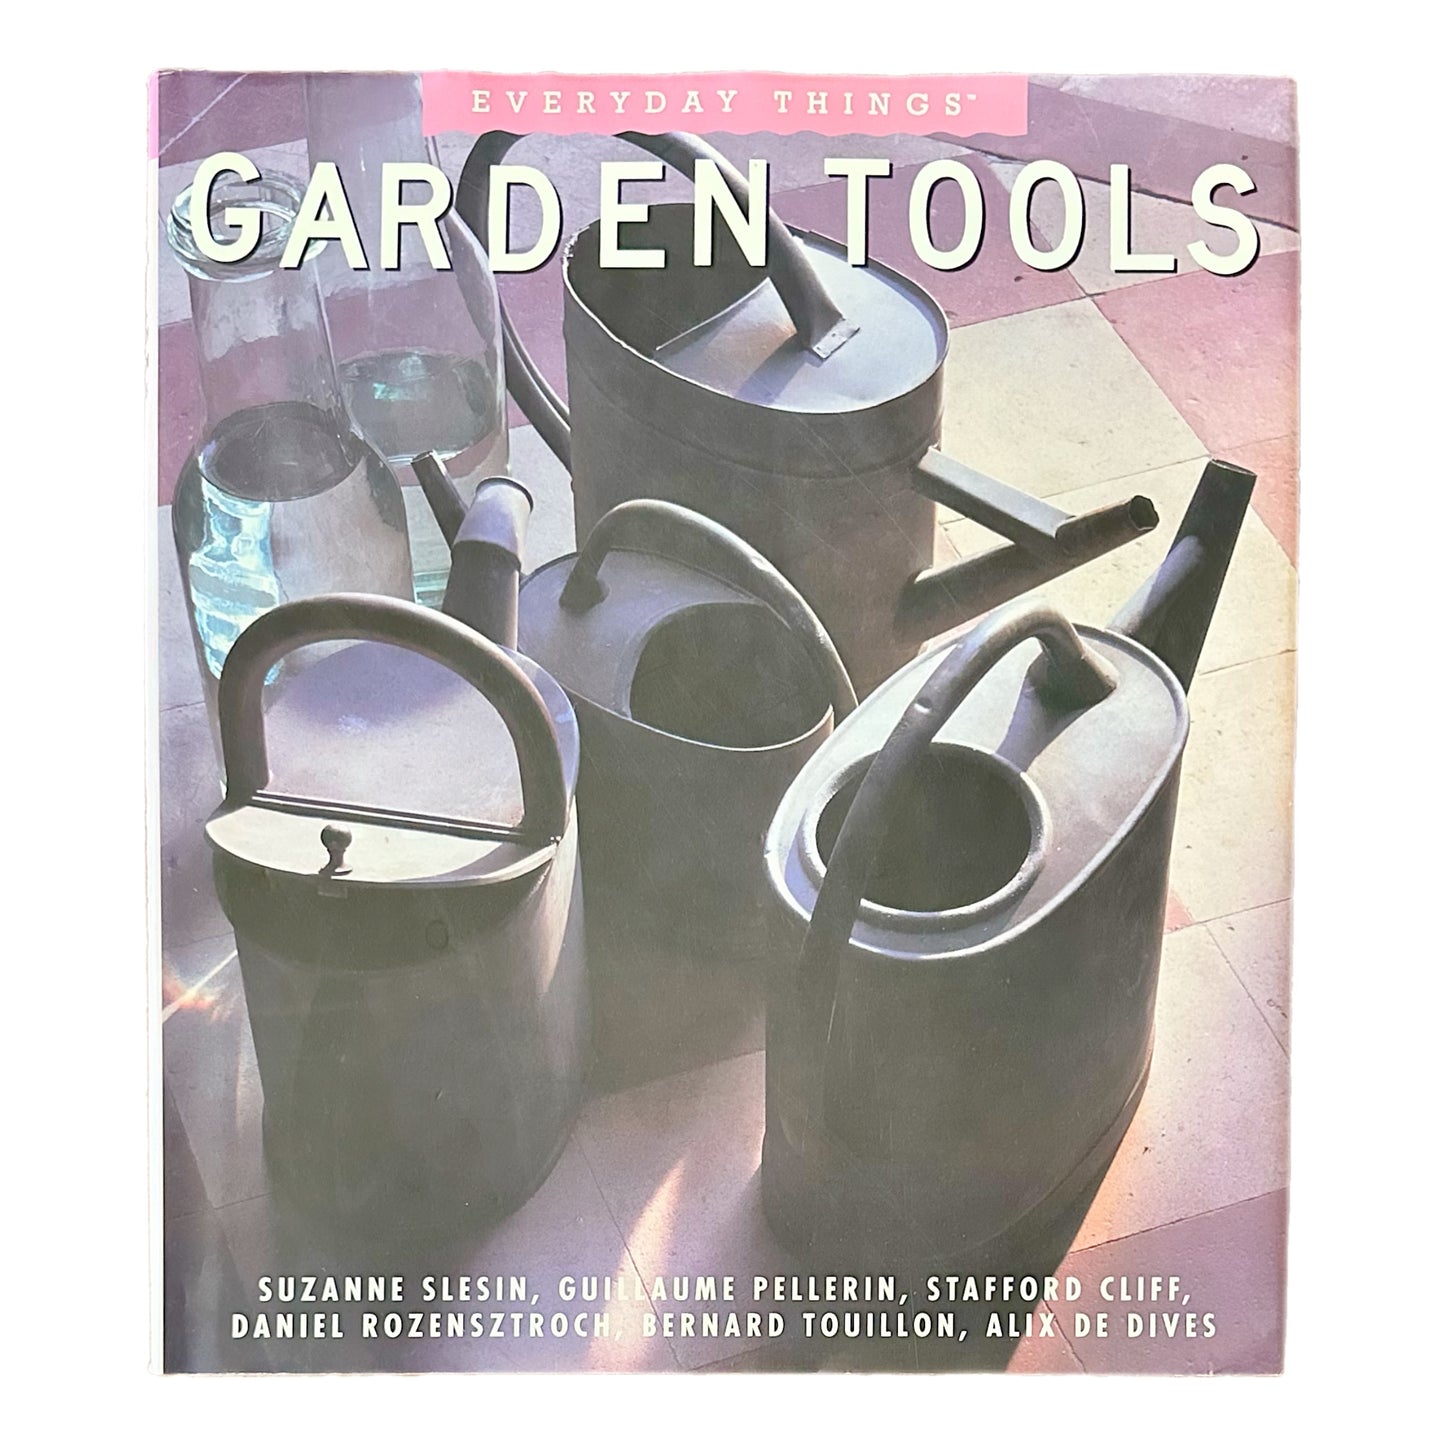 GARDEN TOOLS [EVERYDAY THINGS] (1996) by Suzanne Slesin